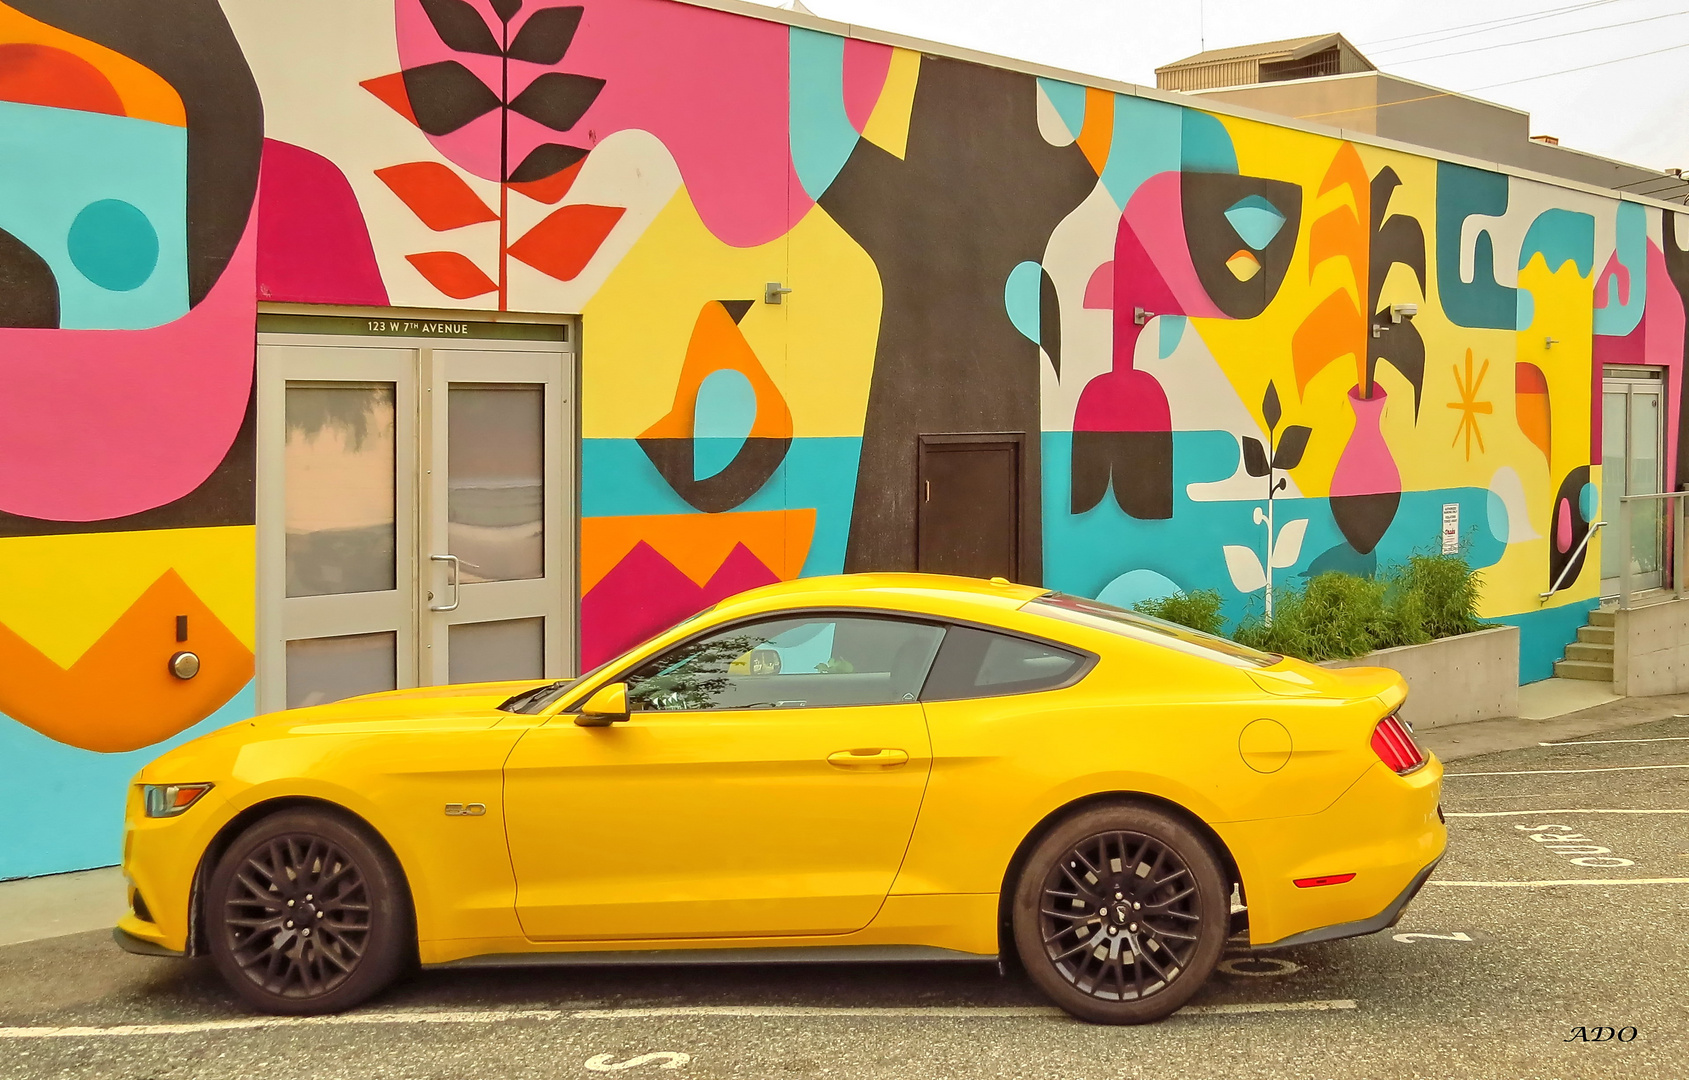 A Yellow Car to Match the Mural